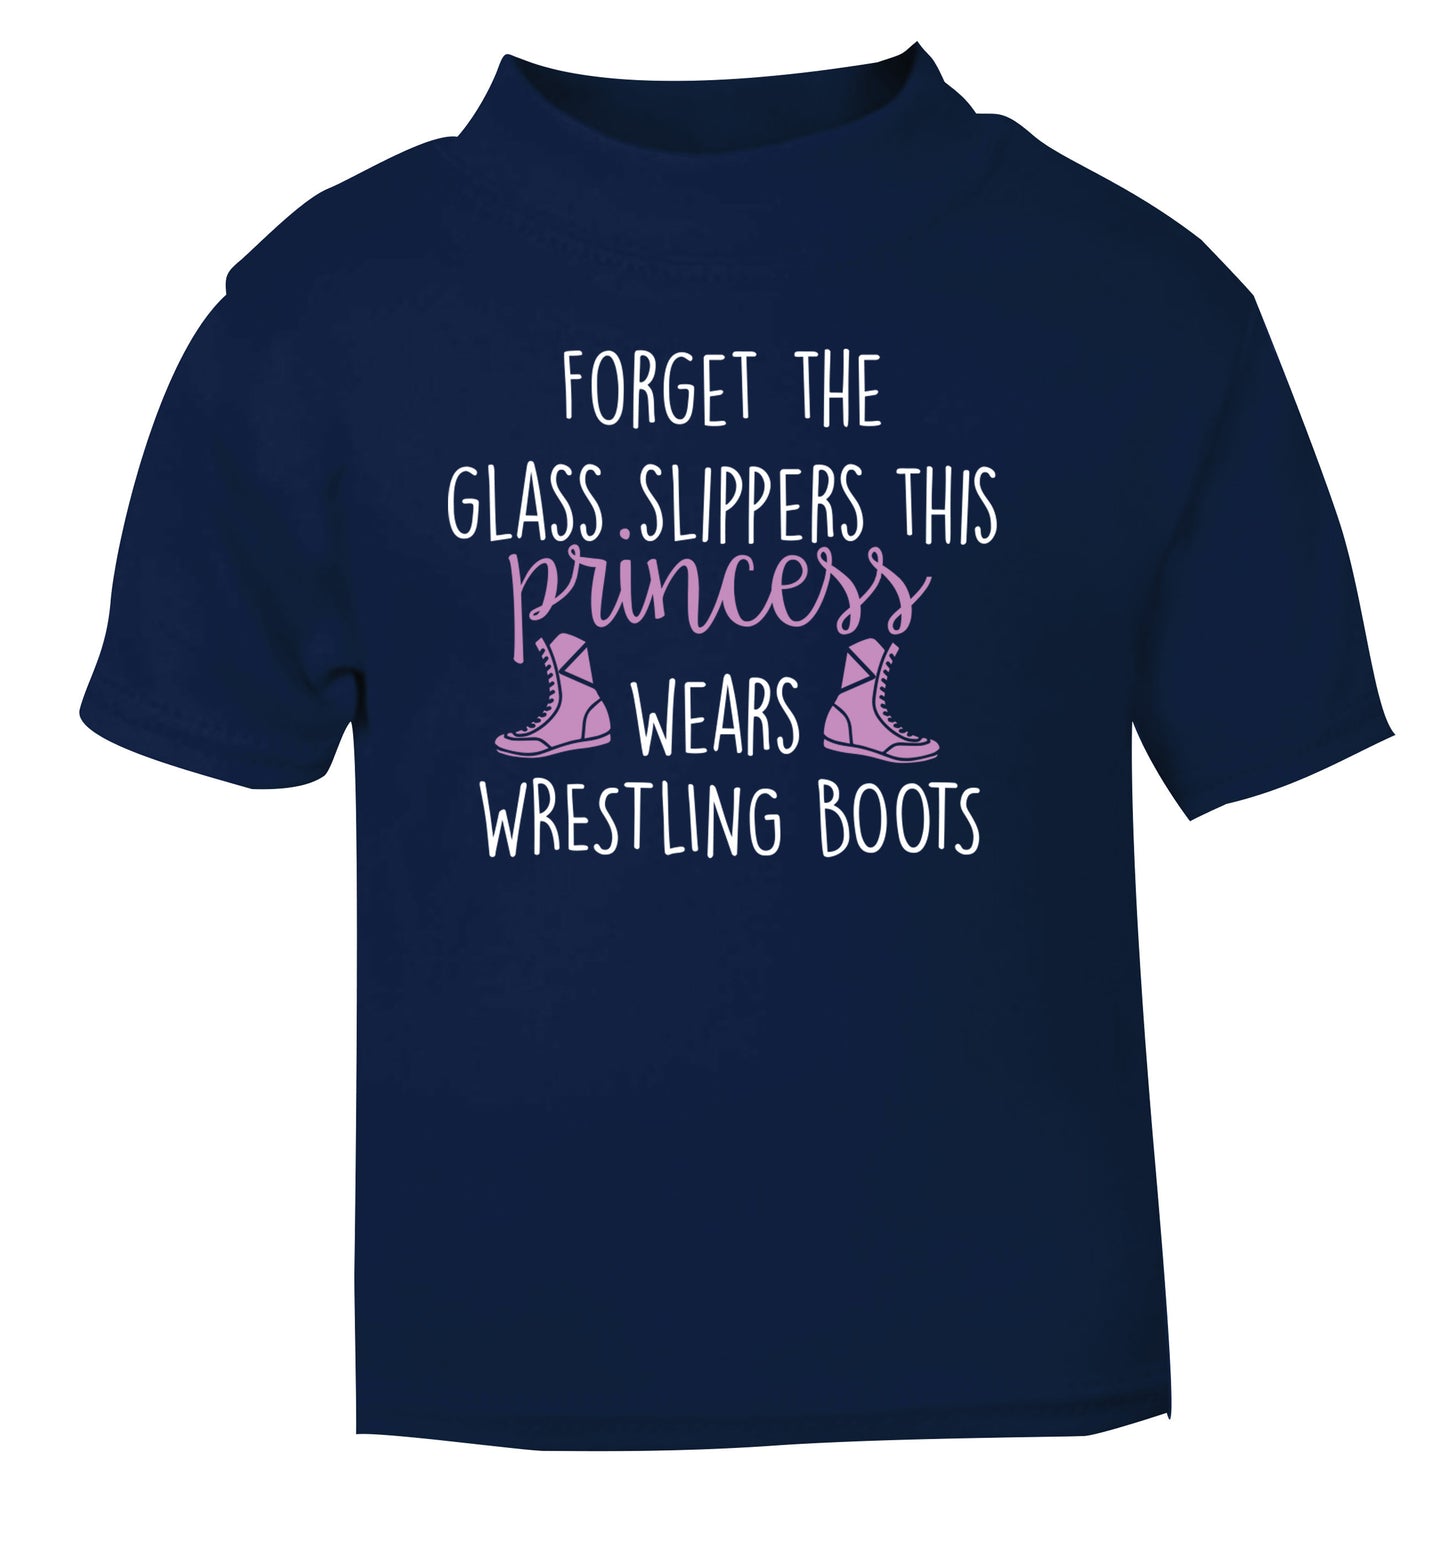 Forget the glass slippers this princess wears wrestling boots navy Baby Toddler Tshirt 2 Years